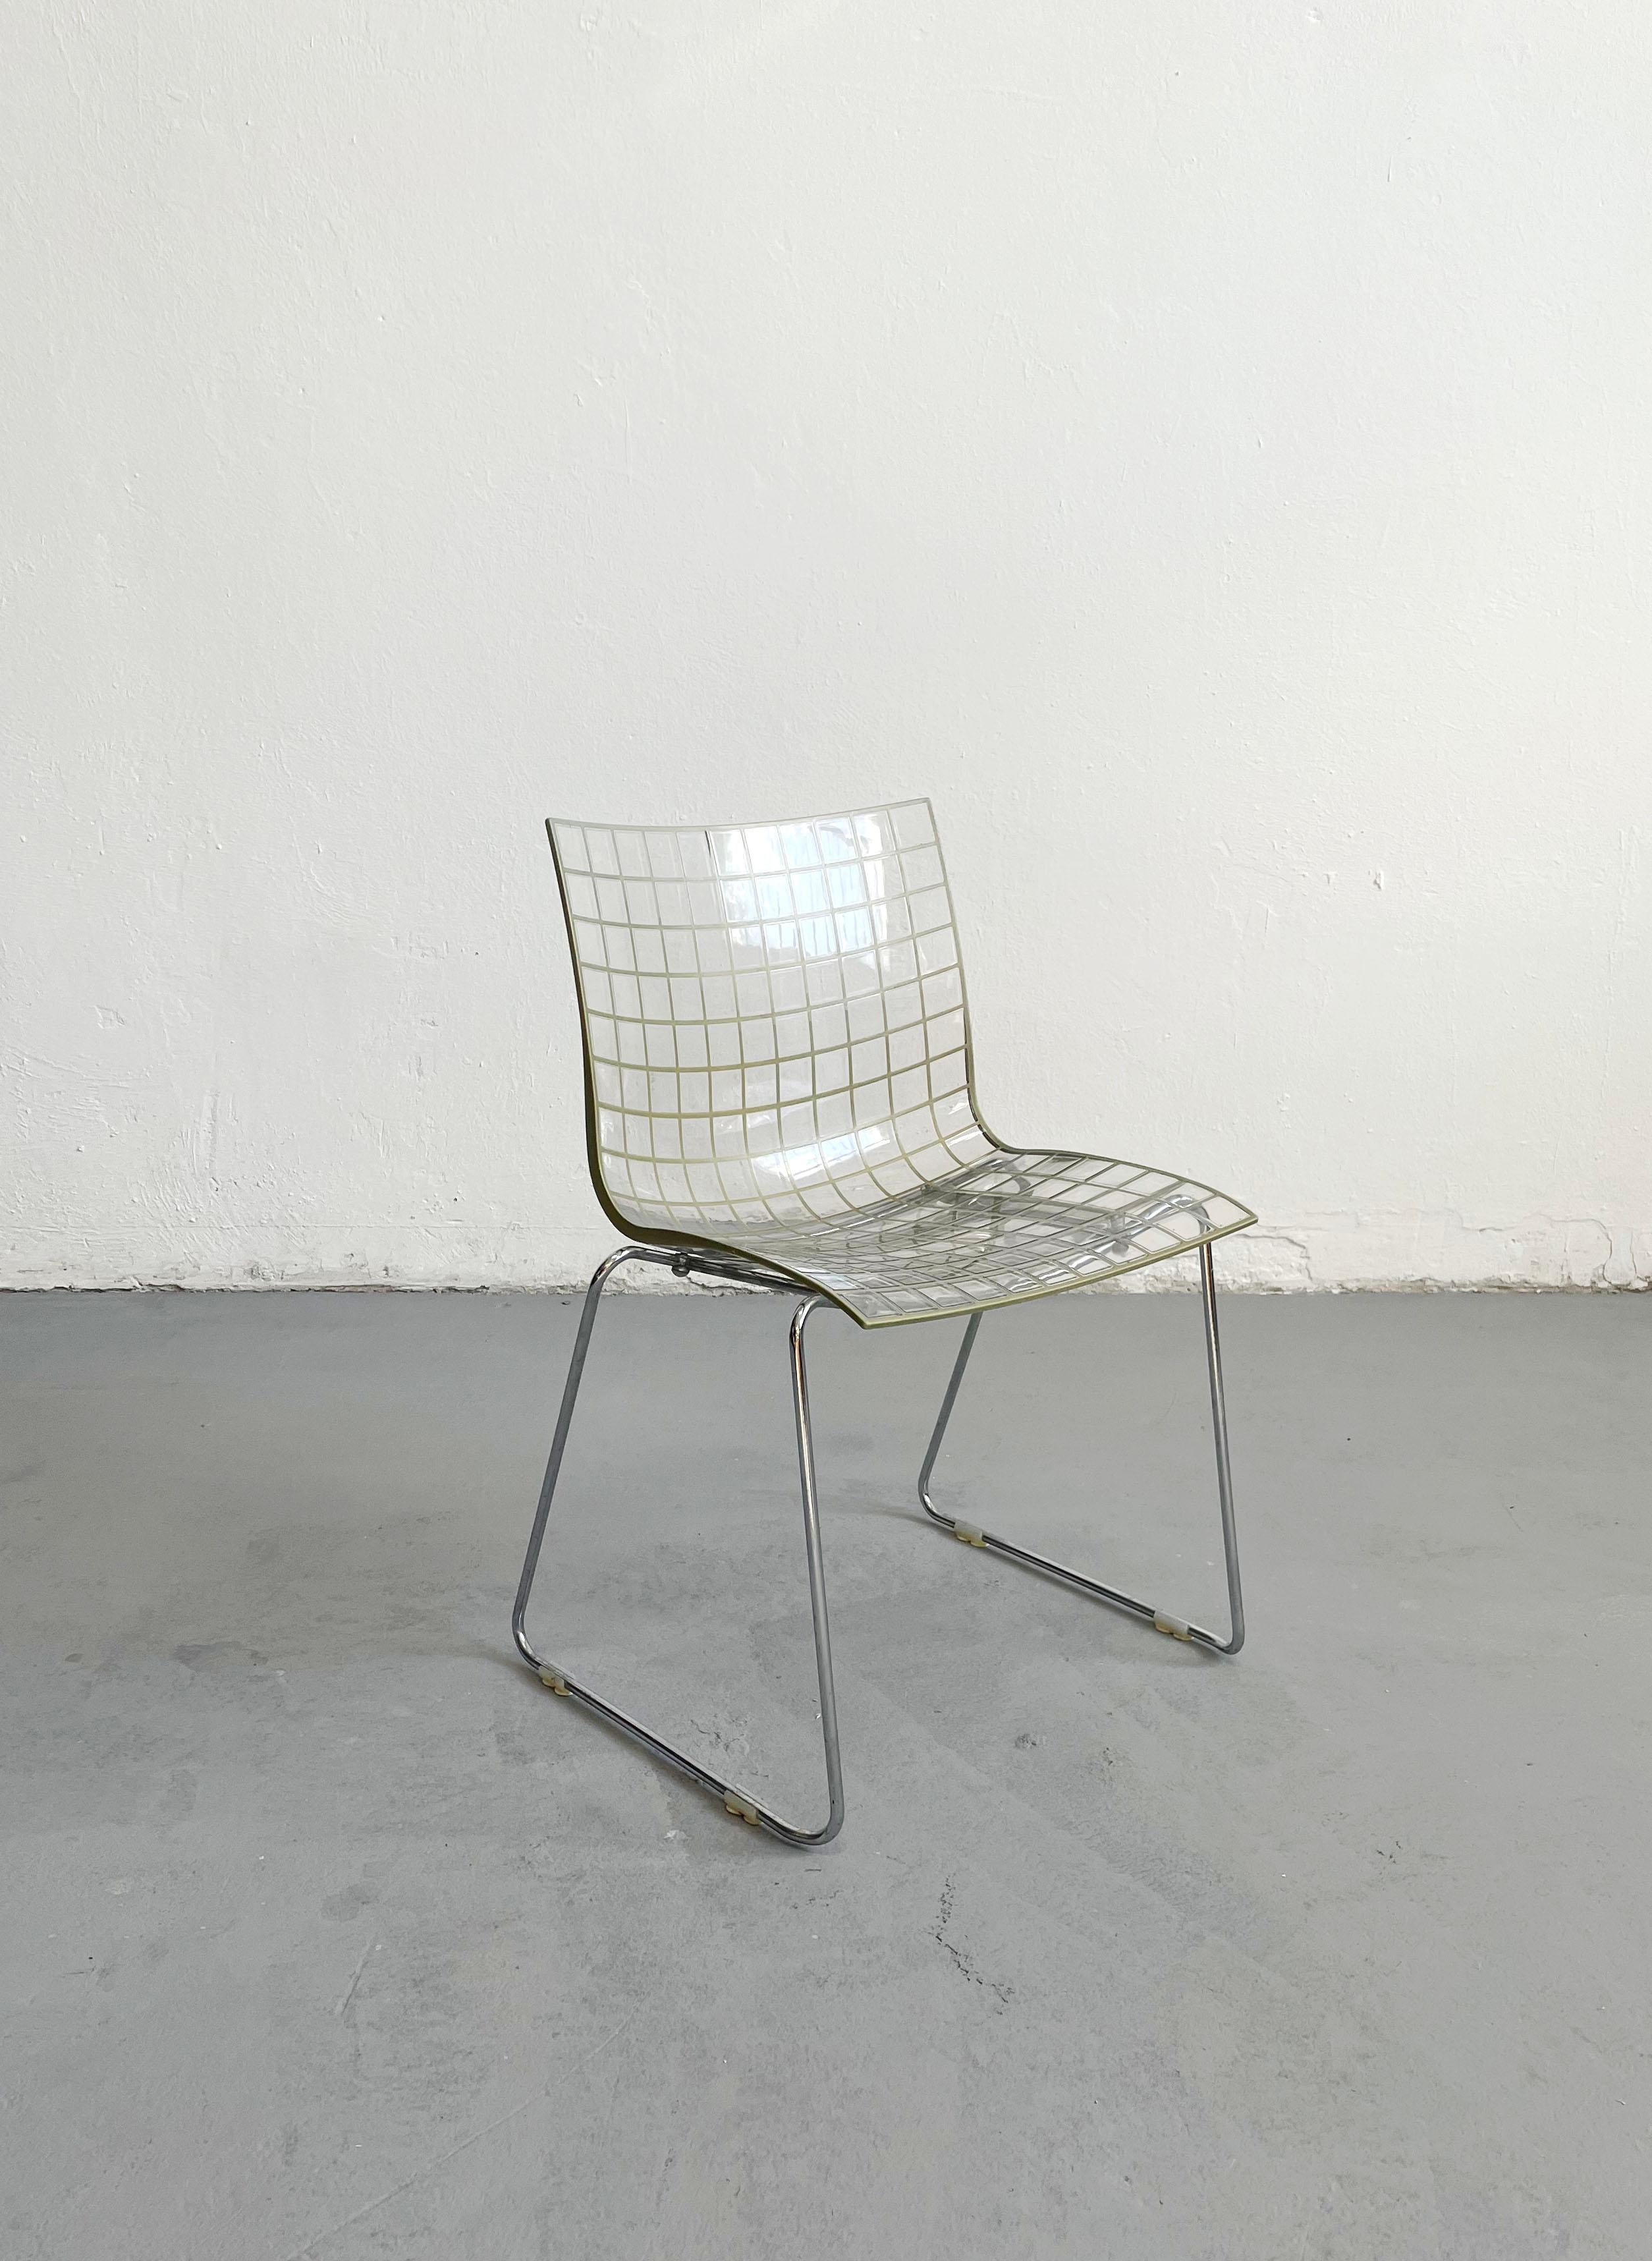 “X3” Chair with slide base, Italy 2000s.
Designer: Marco Maran
Signed

The single-piece transparent seat with a regular square mesh structure is obtained from the bi-injection of two materials, transparent polycarbonate, and mass-colored